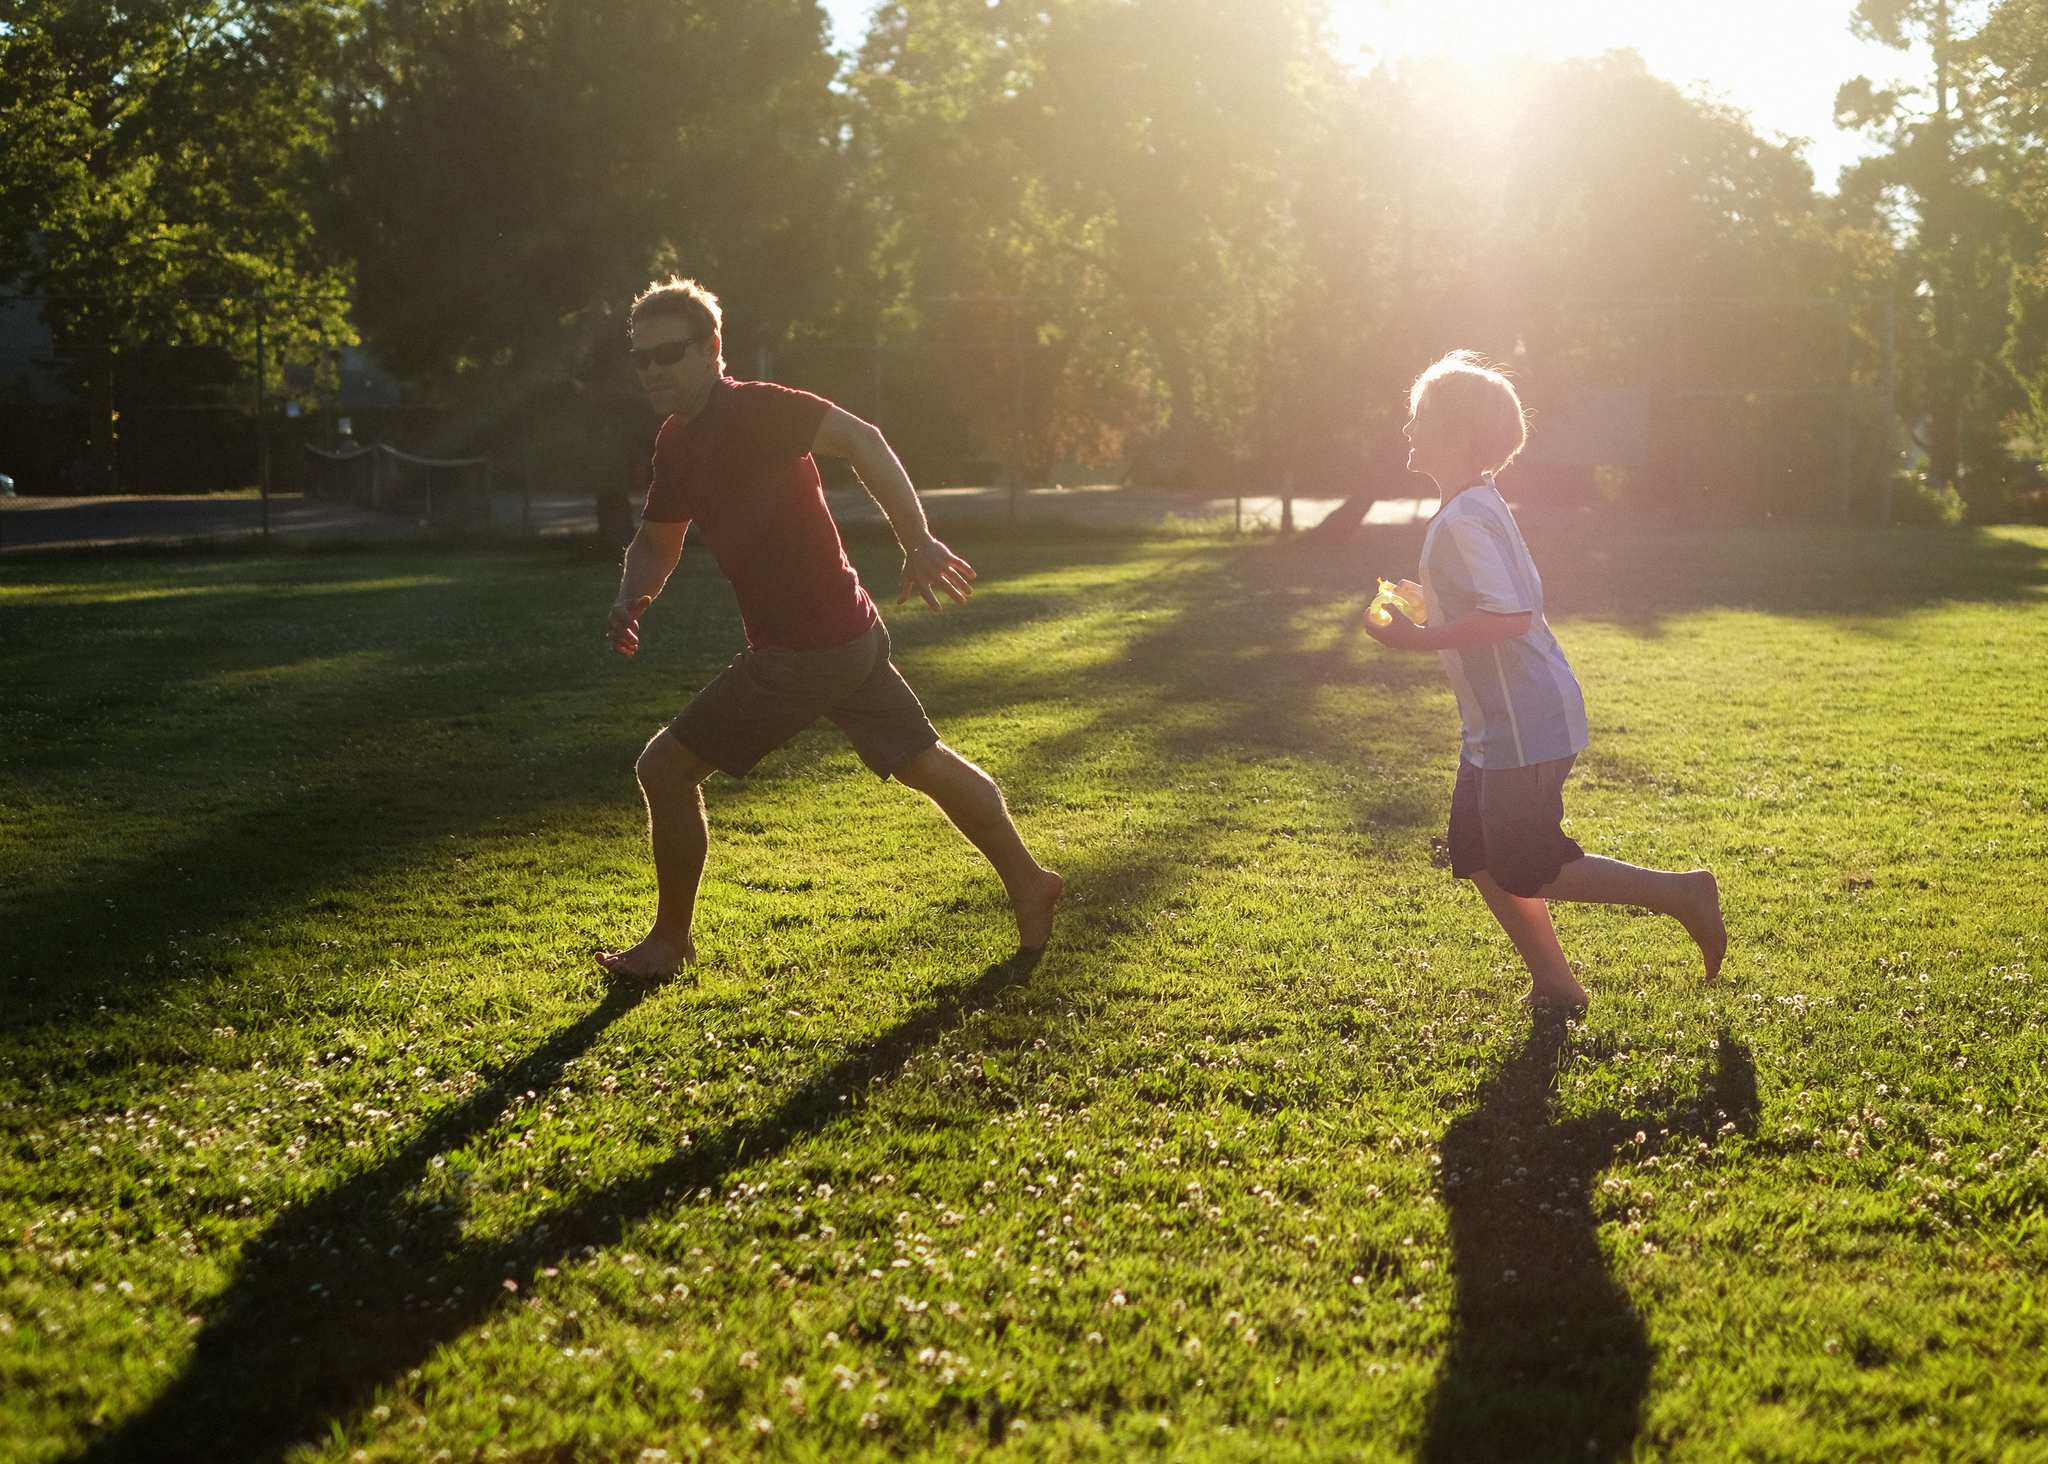 A man and a child are shown chasing their shadows outside (tag games)